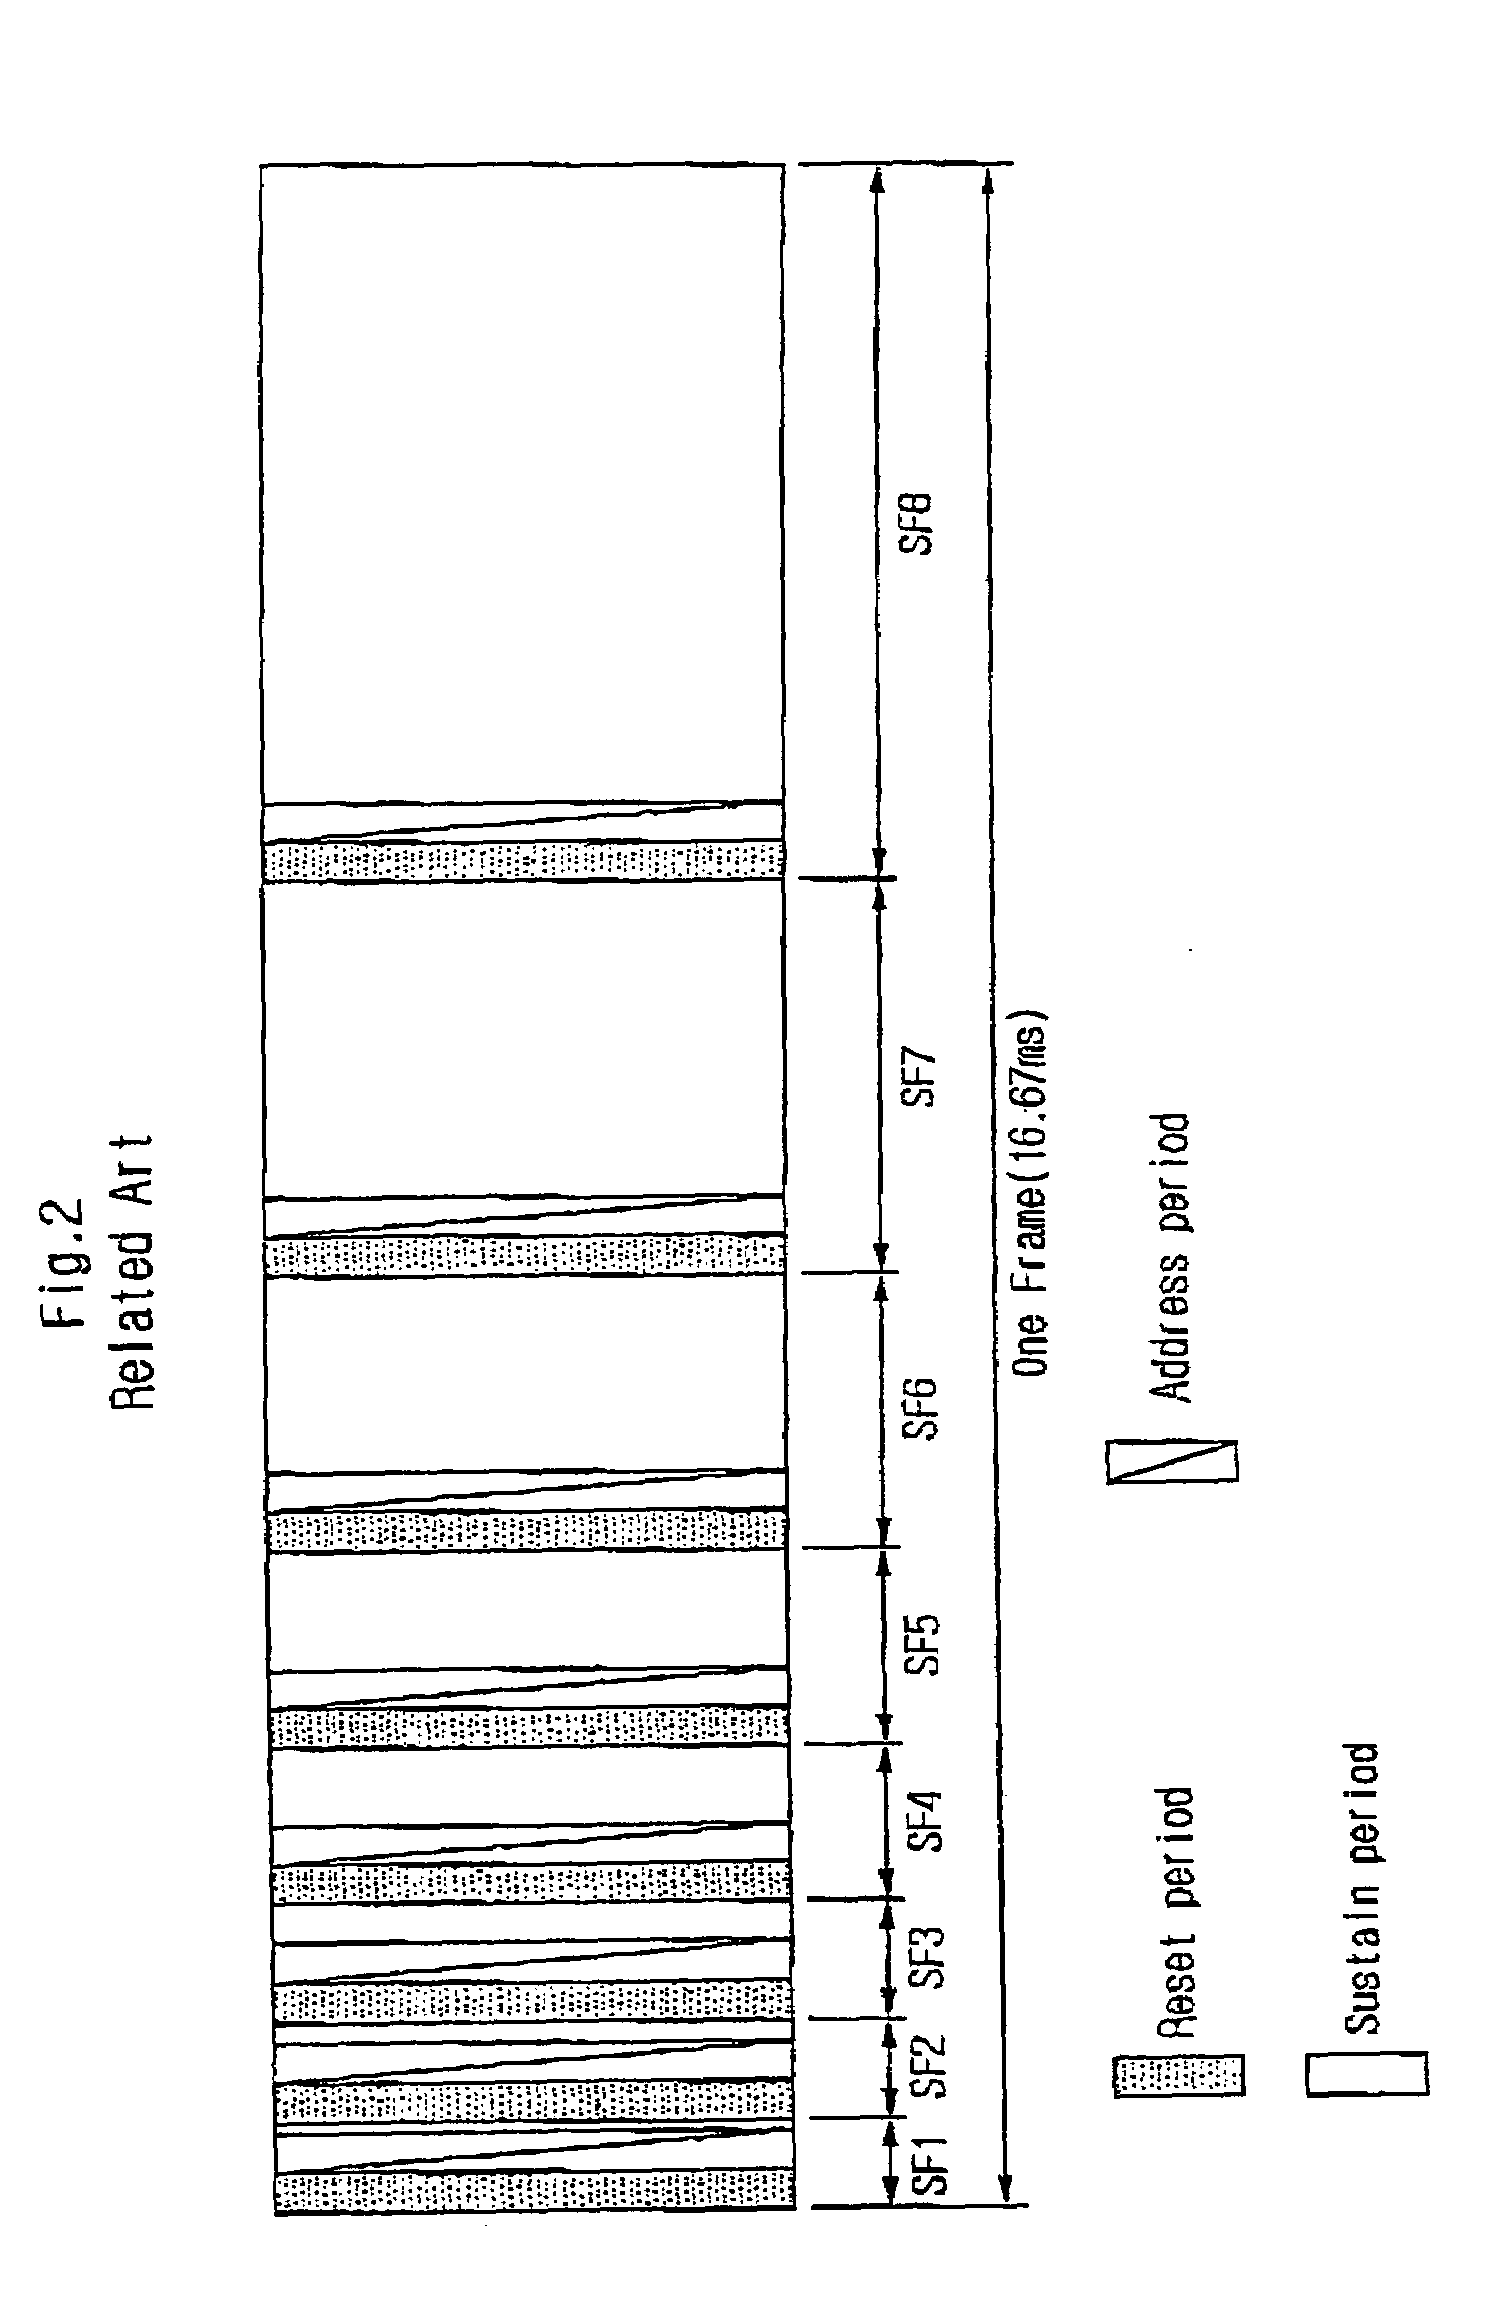 Front filter, and plasma display apparatus having the same